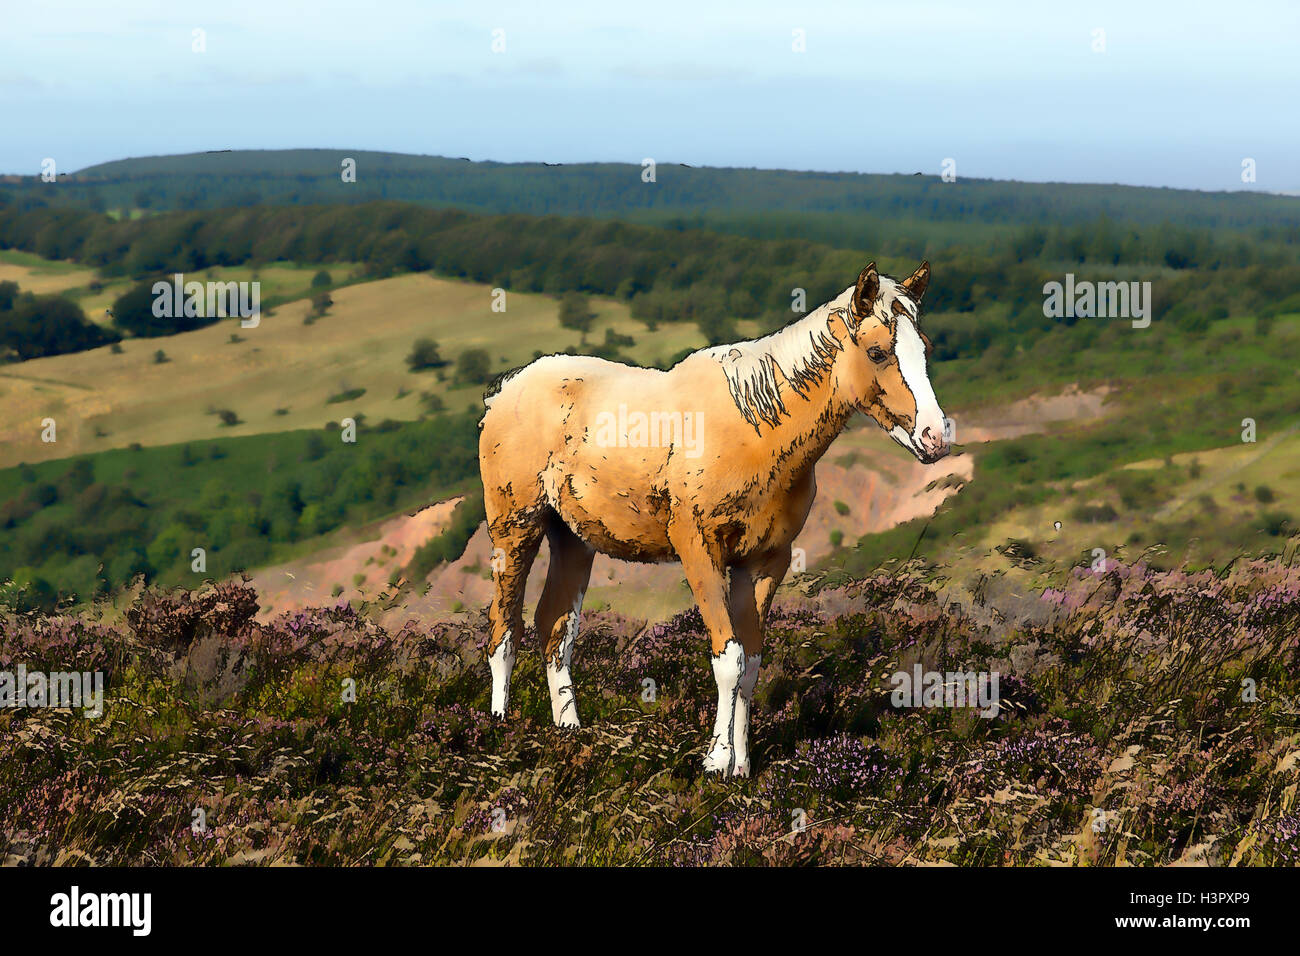 Dun cream colour pony in countryside with purple heather Somerset Quantock Hills UK illustration Stock Photo